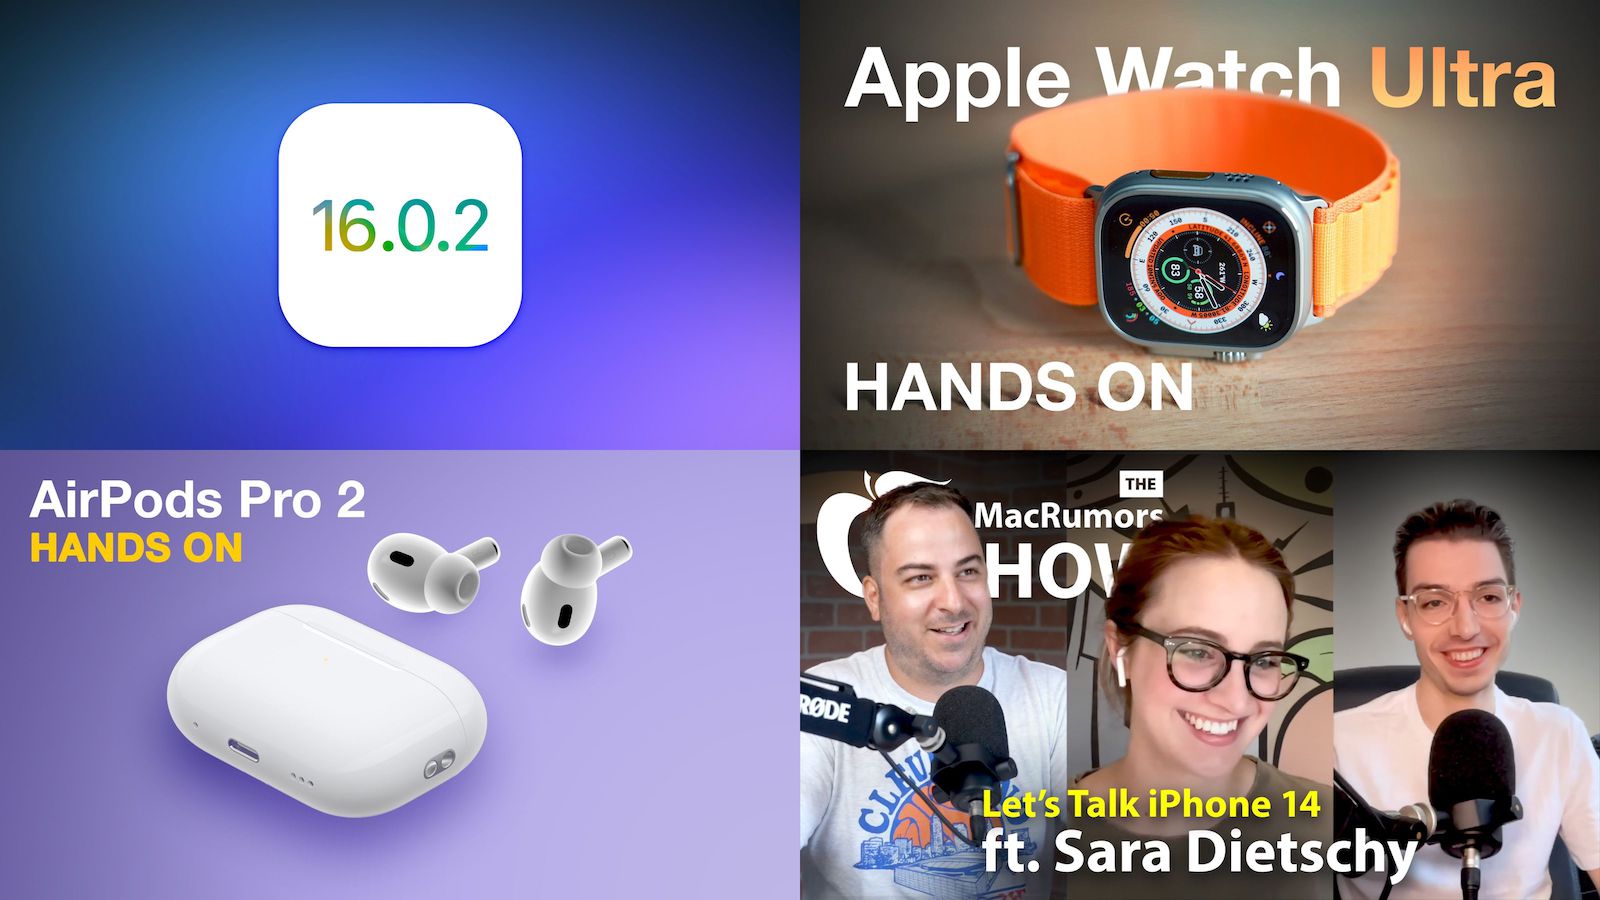 Top Stories: iOS 16.0.2 Bug Fixes, Apple Watch Ultra and AirPods Pro 2 Launch, and More